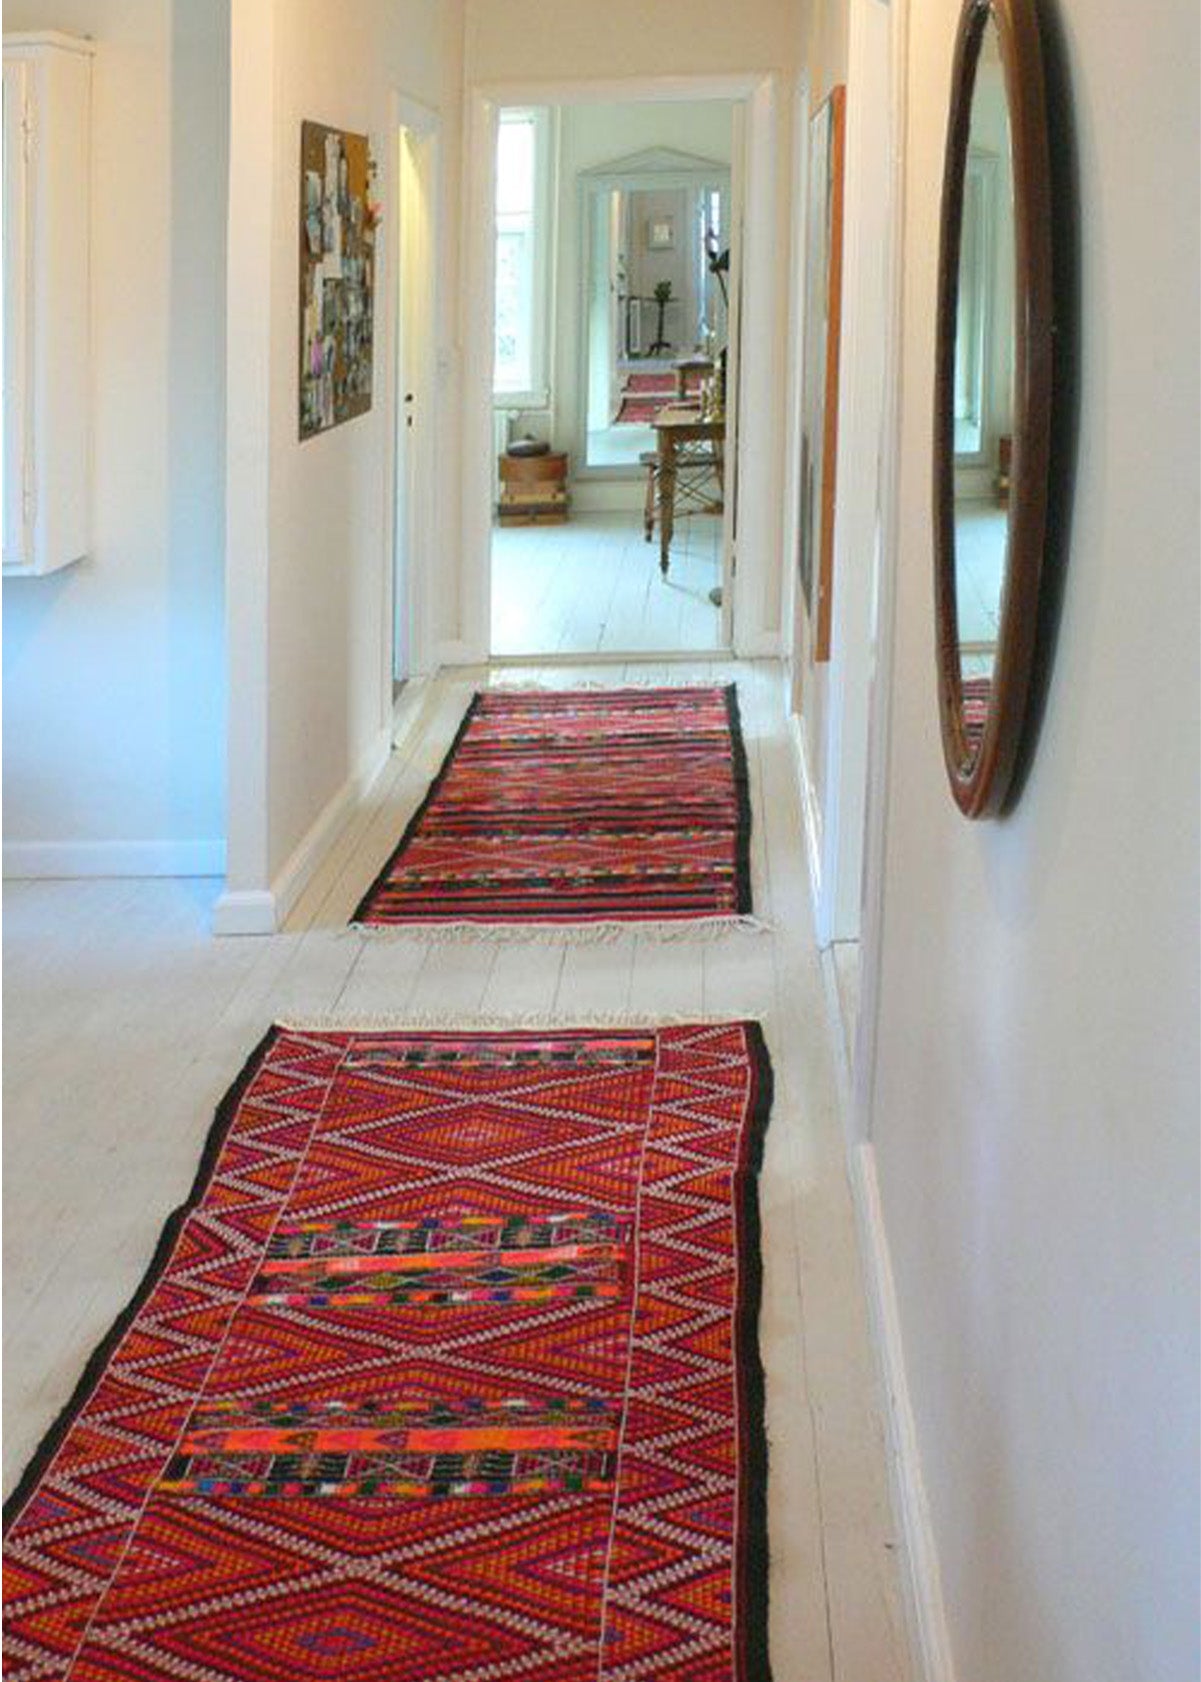 Styling tips on narrow hallways. How to style a vintage runner in your home.